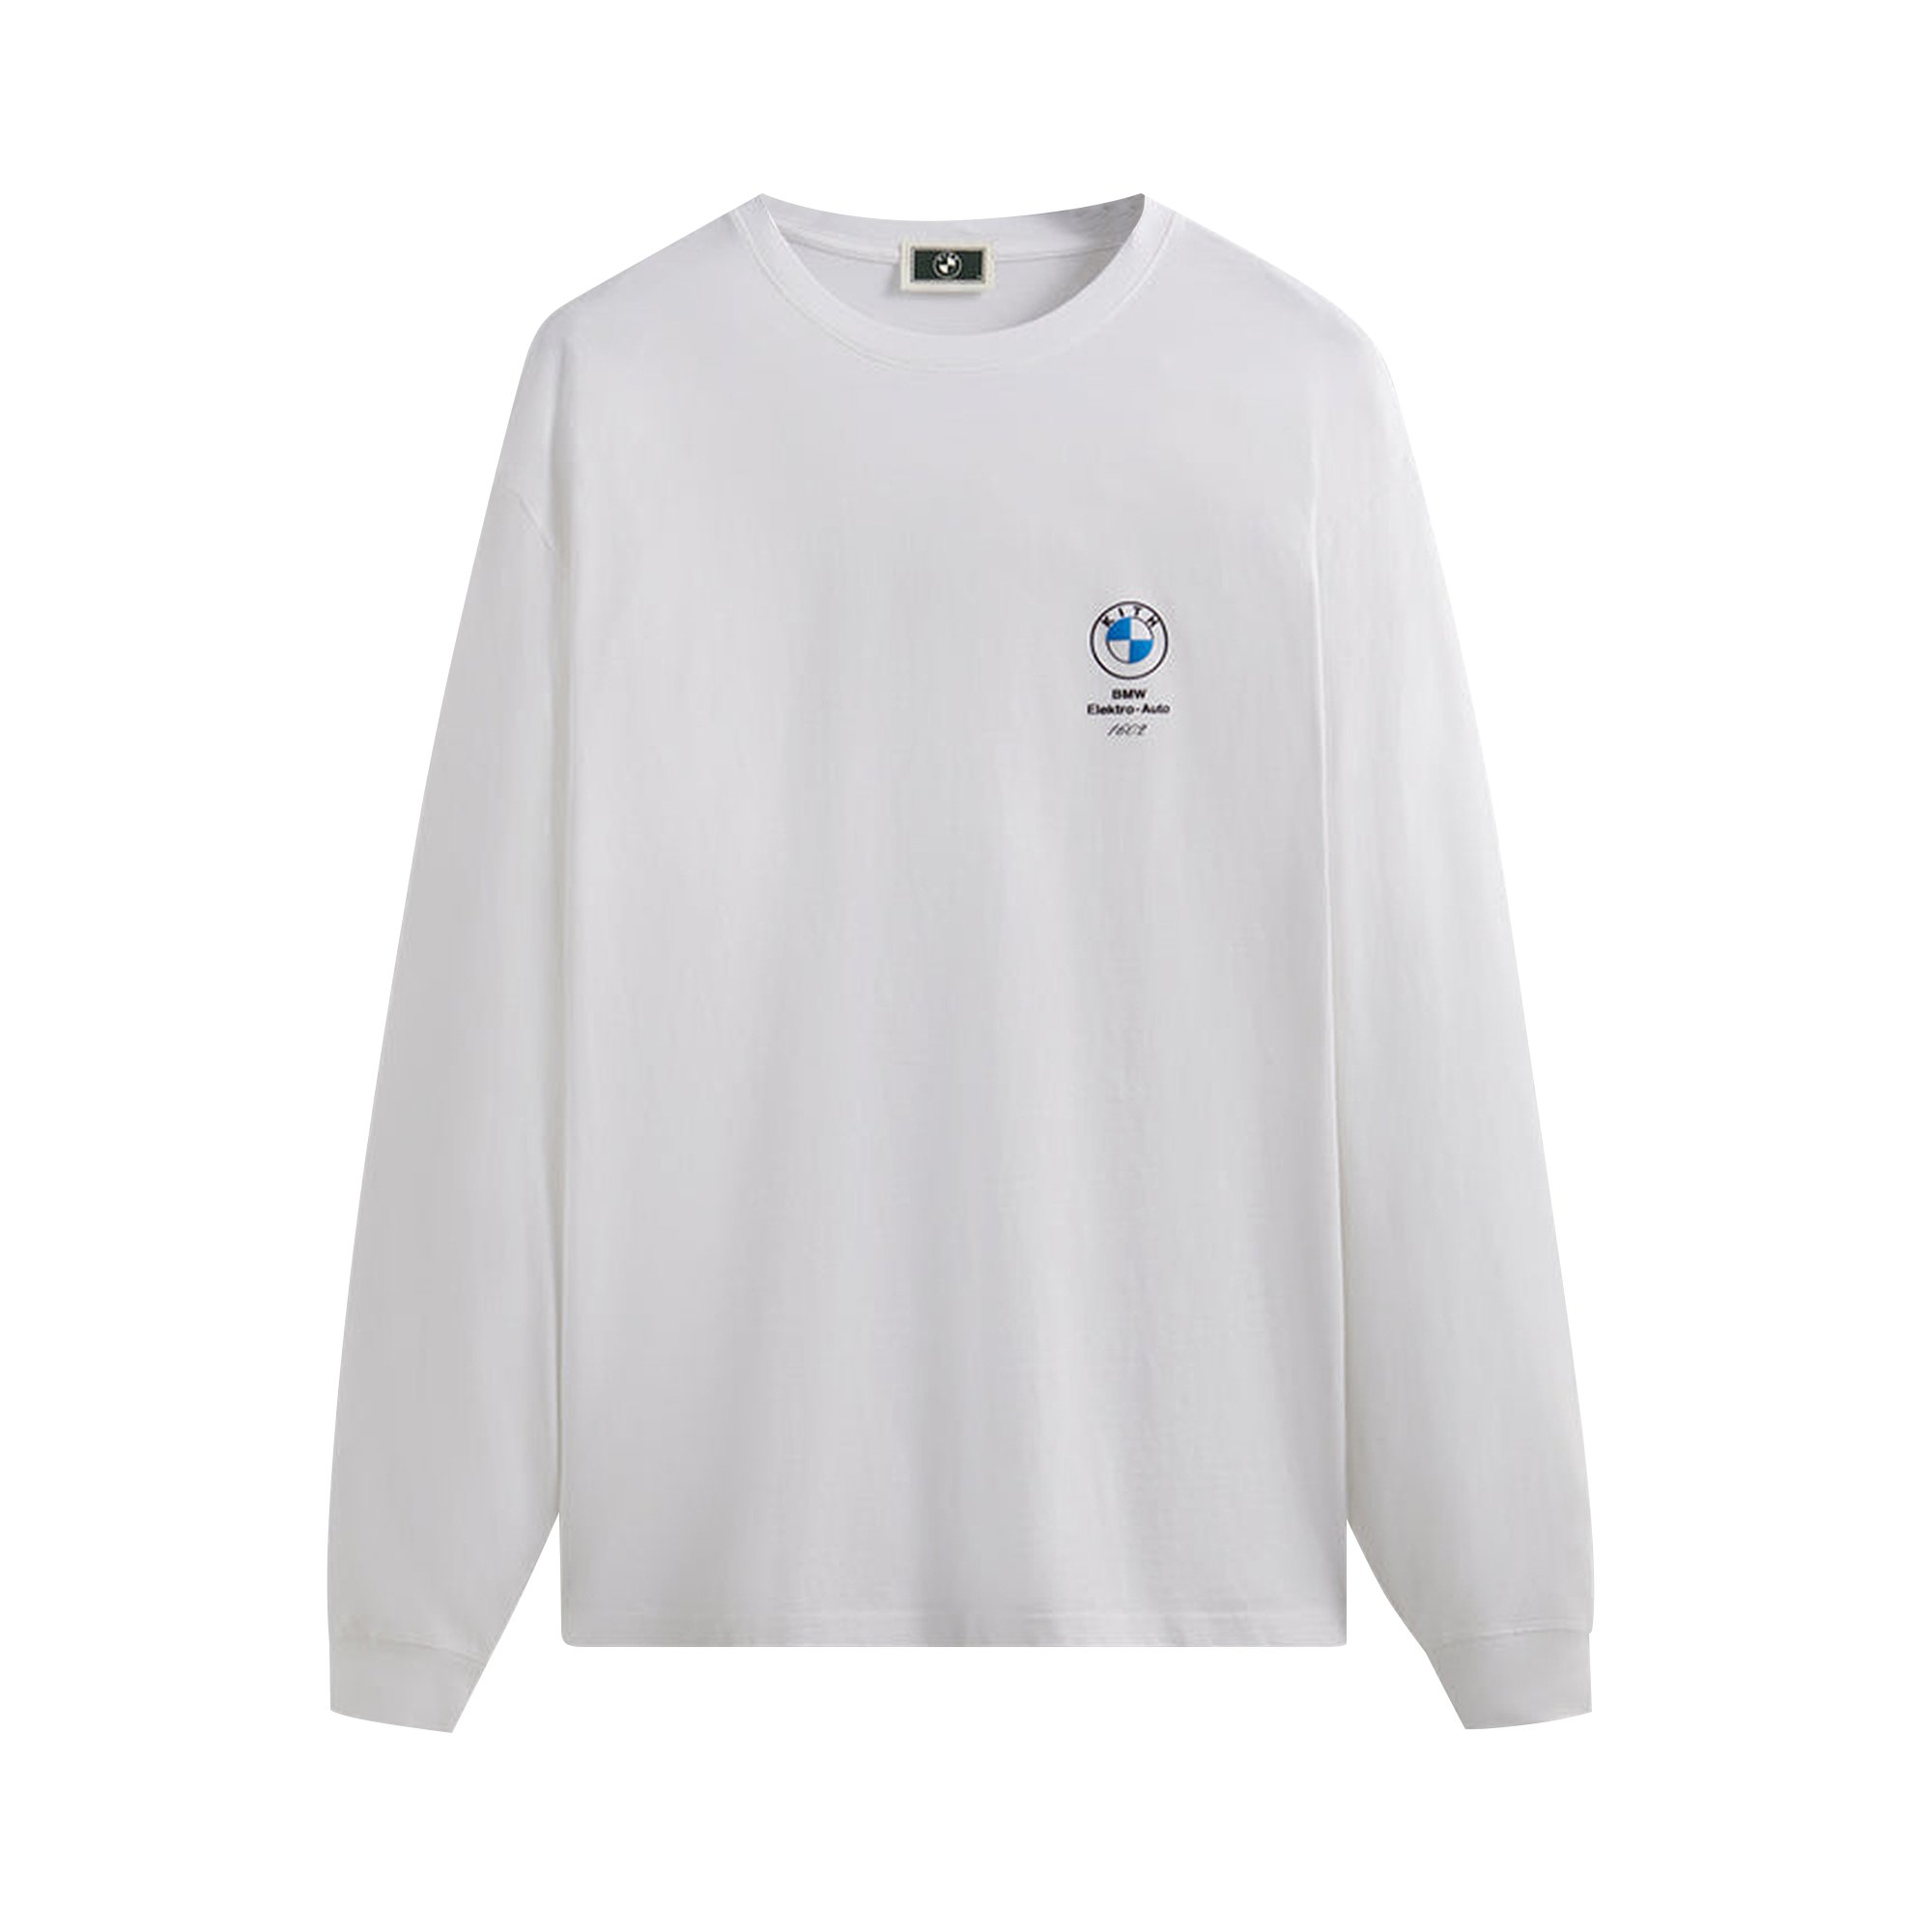 Buy Kith For BMW Crowd Favorite Long-Sleeve Vintage Tee 'White